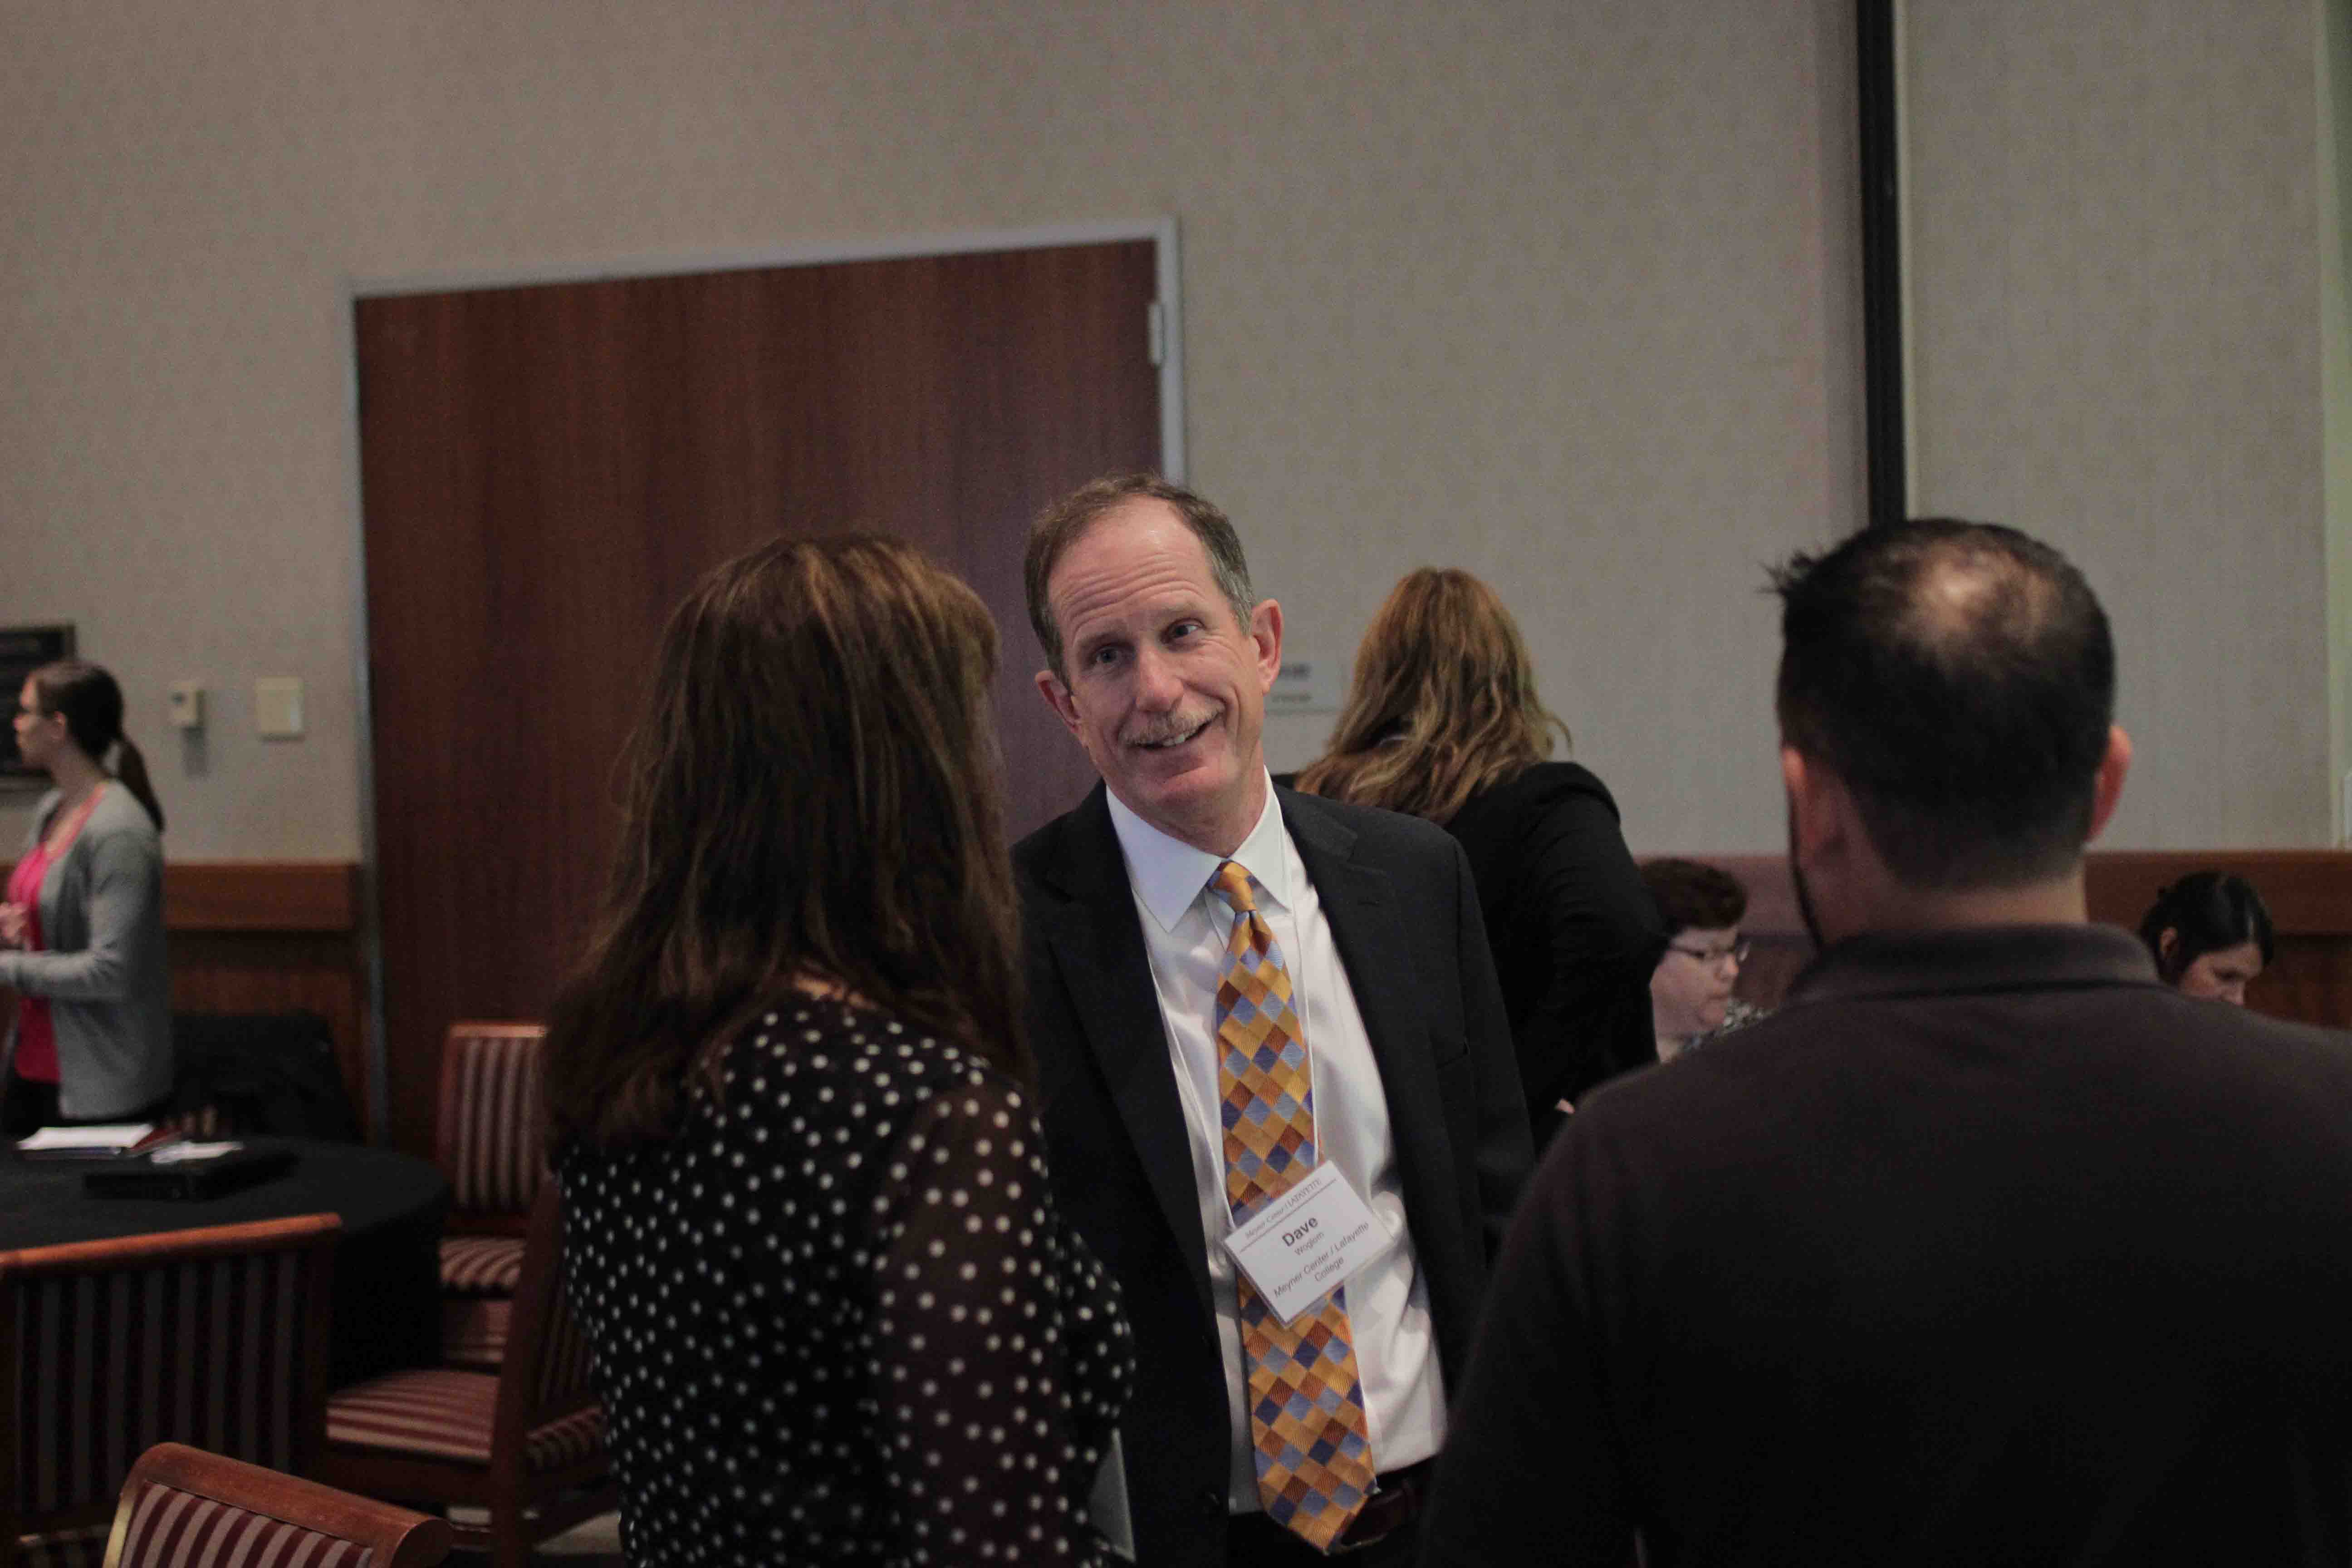 David Woglom chats with attendees at the annual Meyner Center Annual Forum on Local Government.